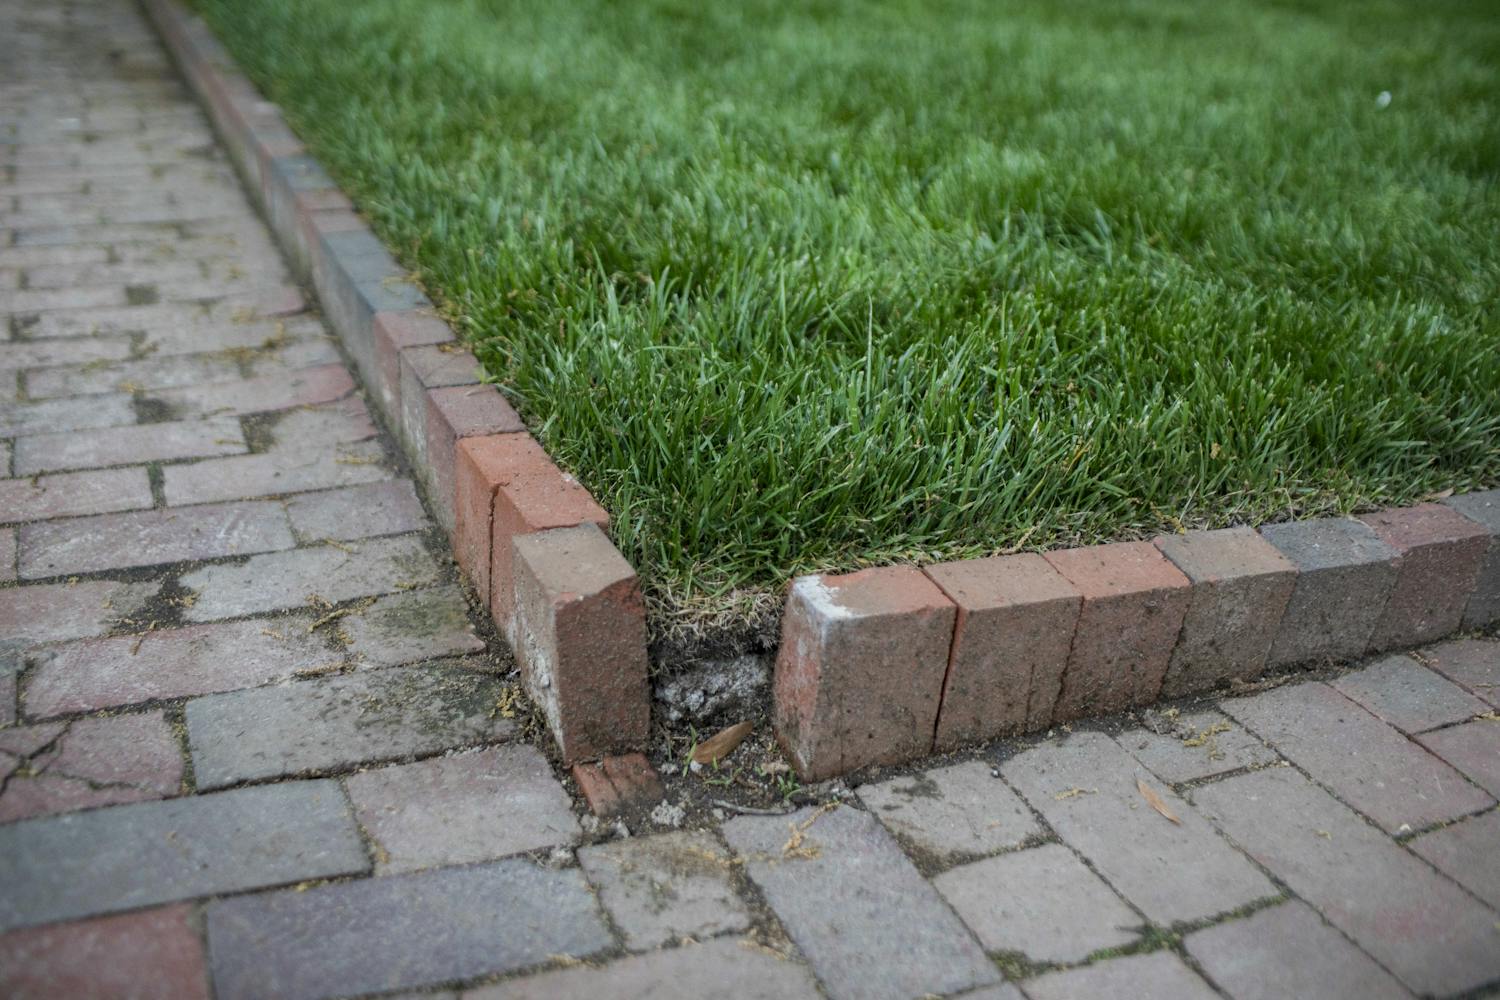 UNC seniors have a habit of stealing bricks from around campus at the end of the year to keep as souvenirs.